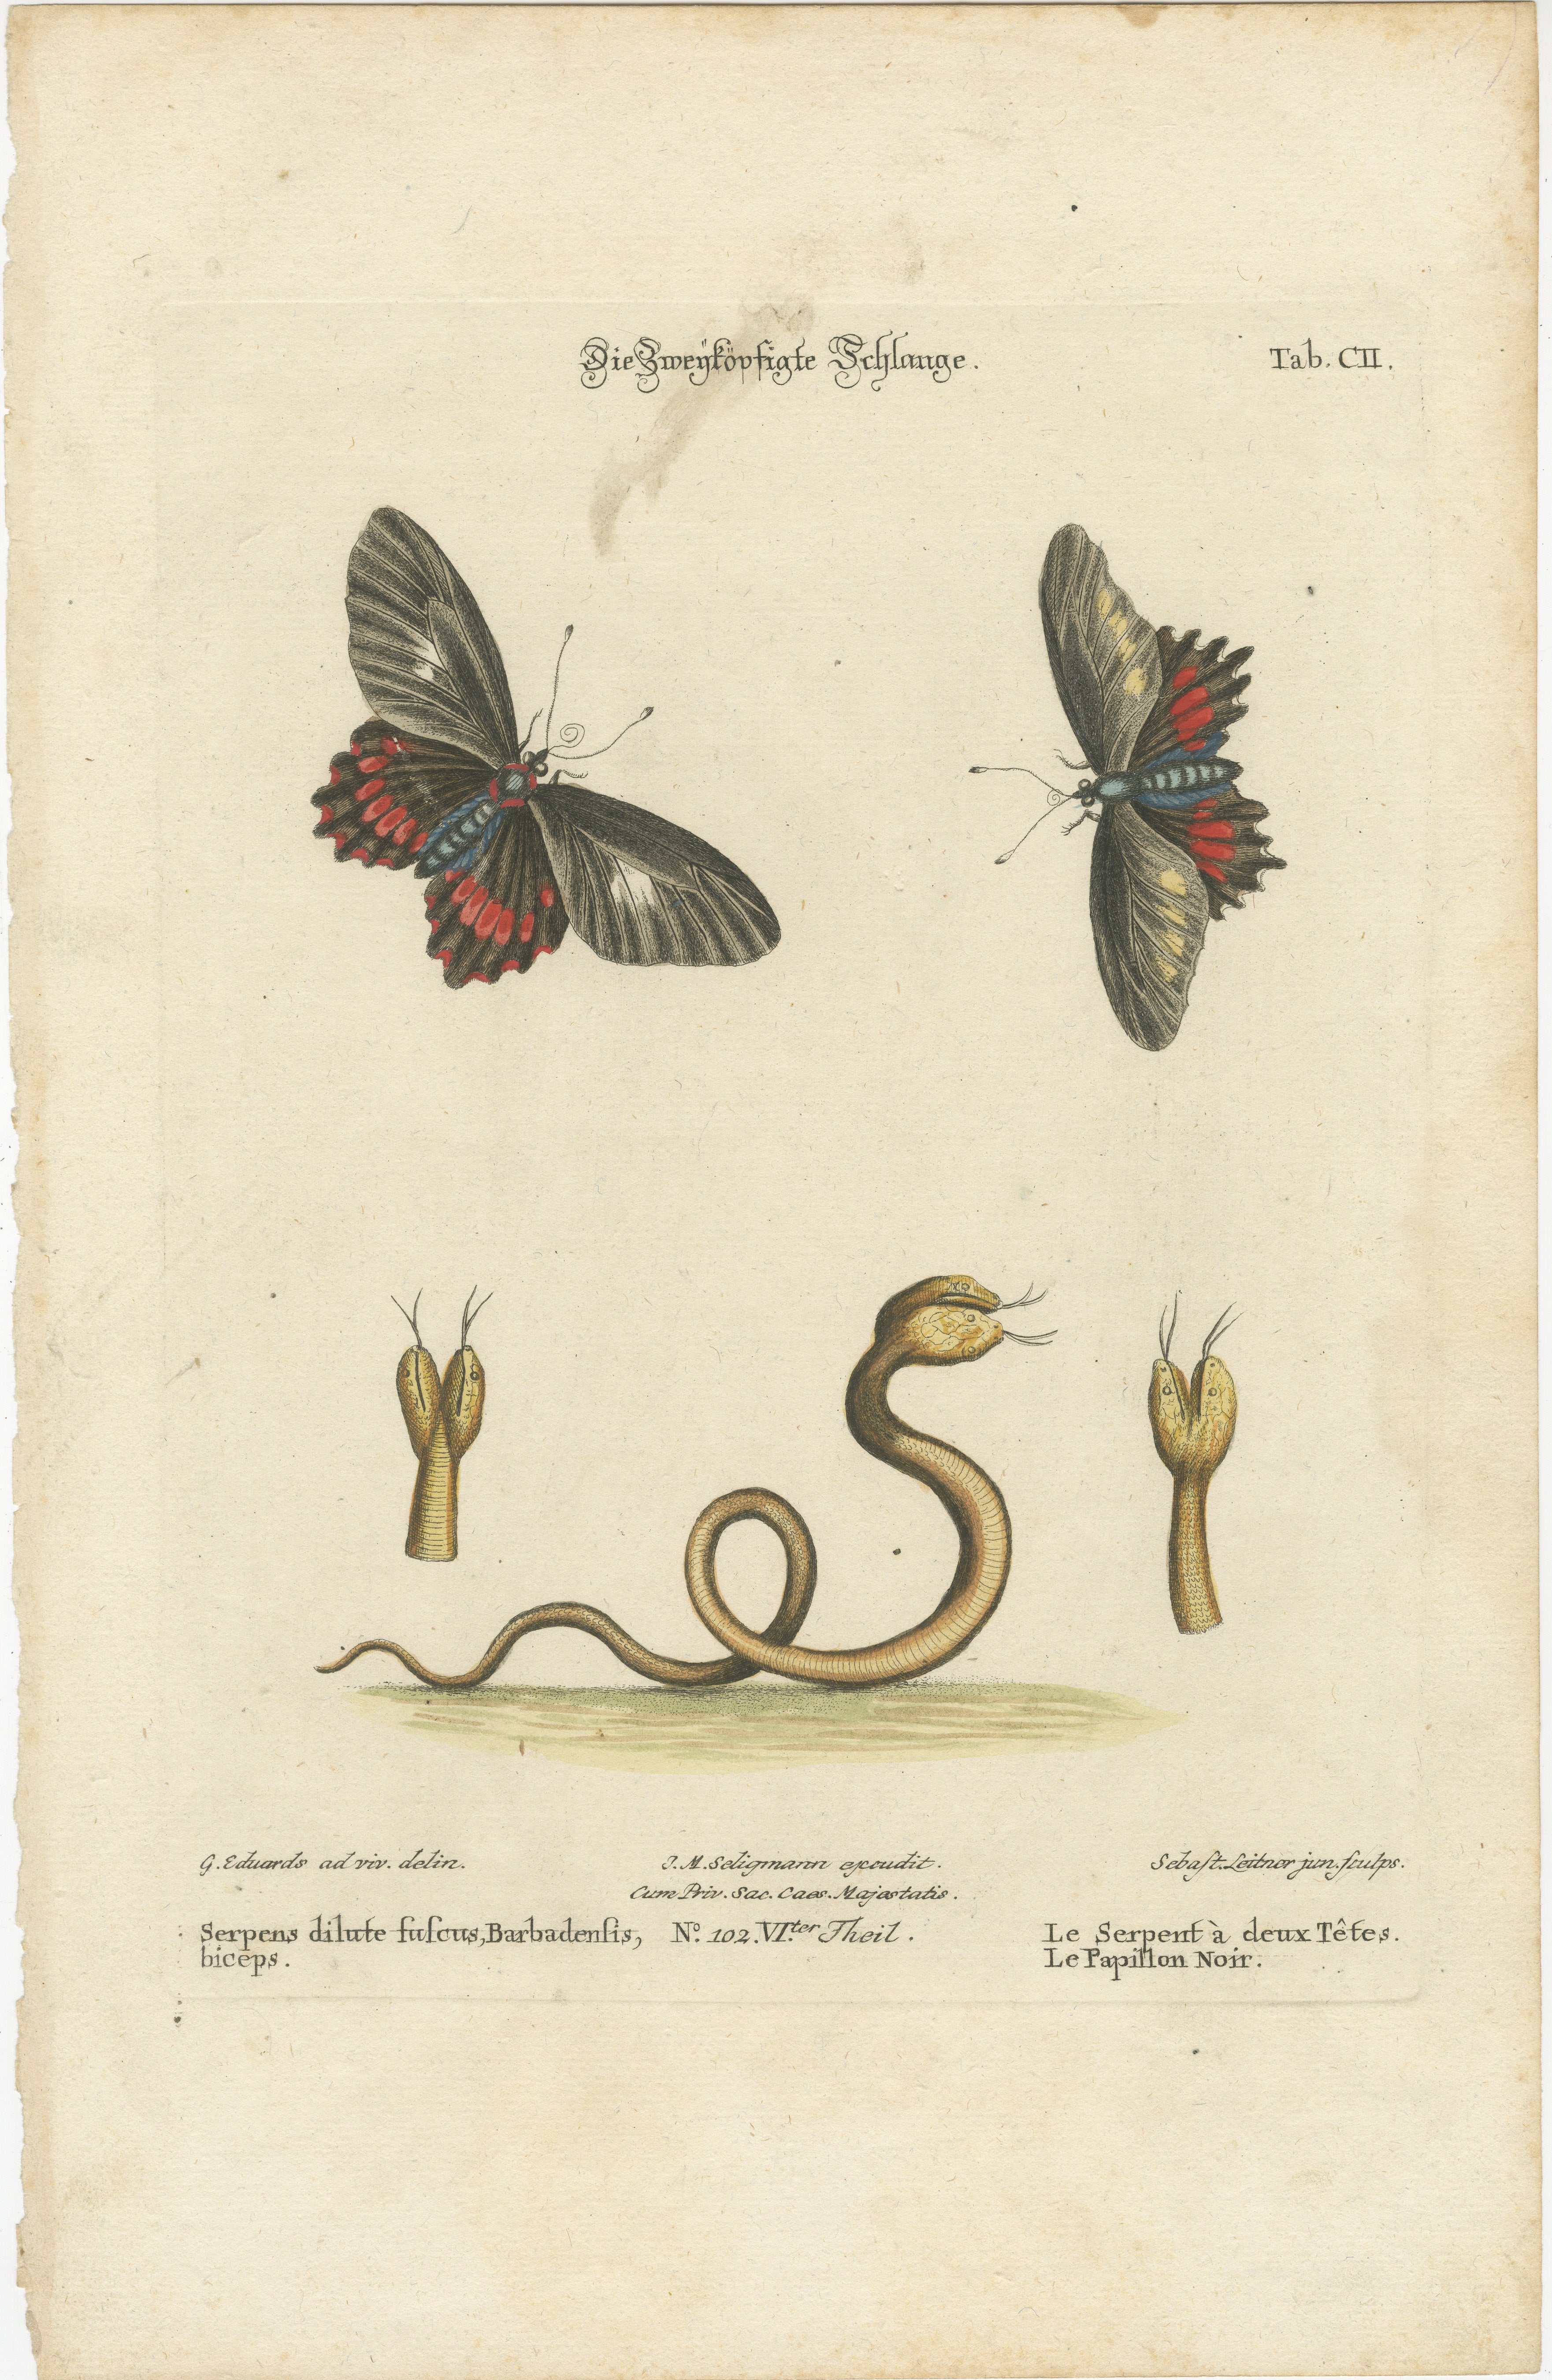 This is a hand-colored engraving from Johann Michael Seligmann's work,  depicting a butterfly and a two-headed snake. 

Below is the transcription and translation of the text:

- 